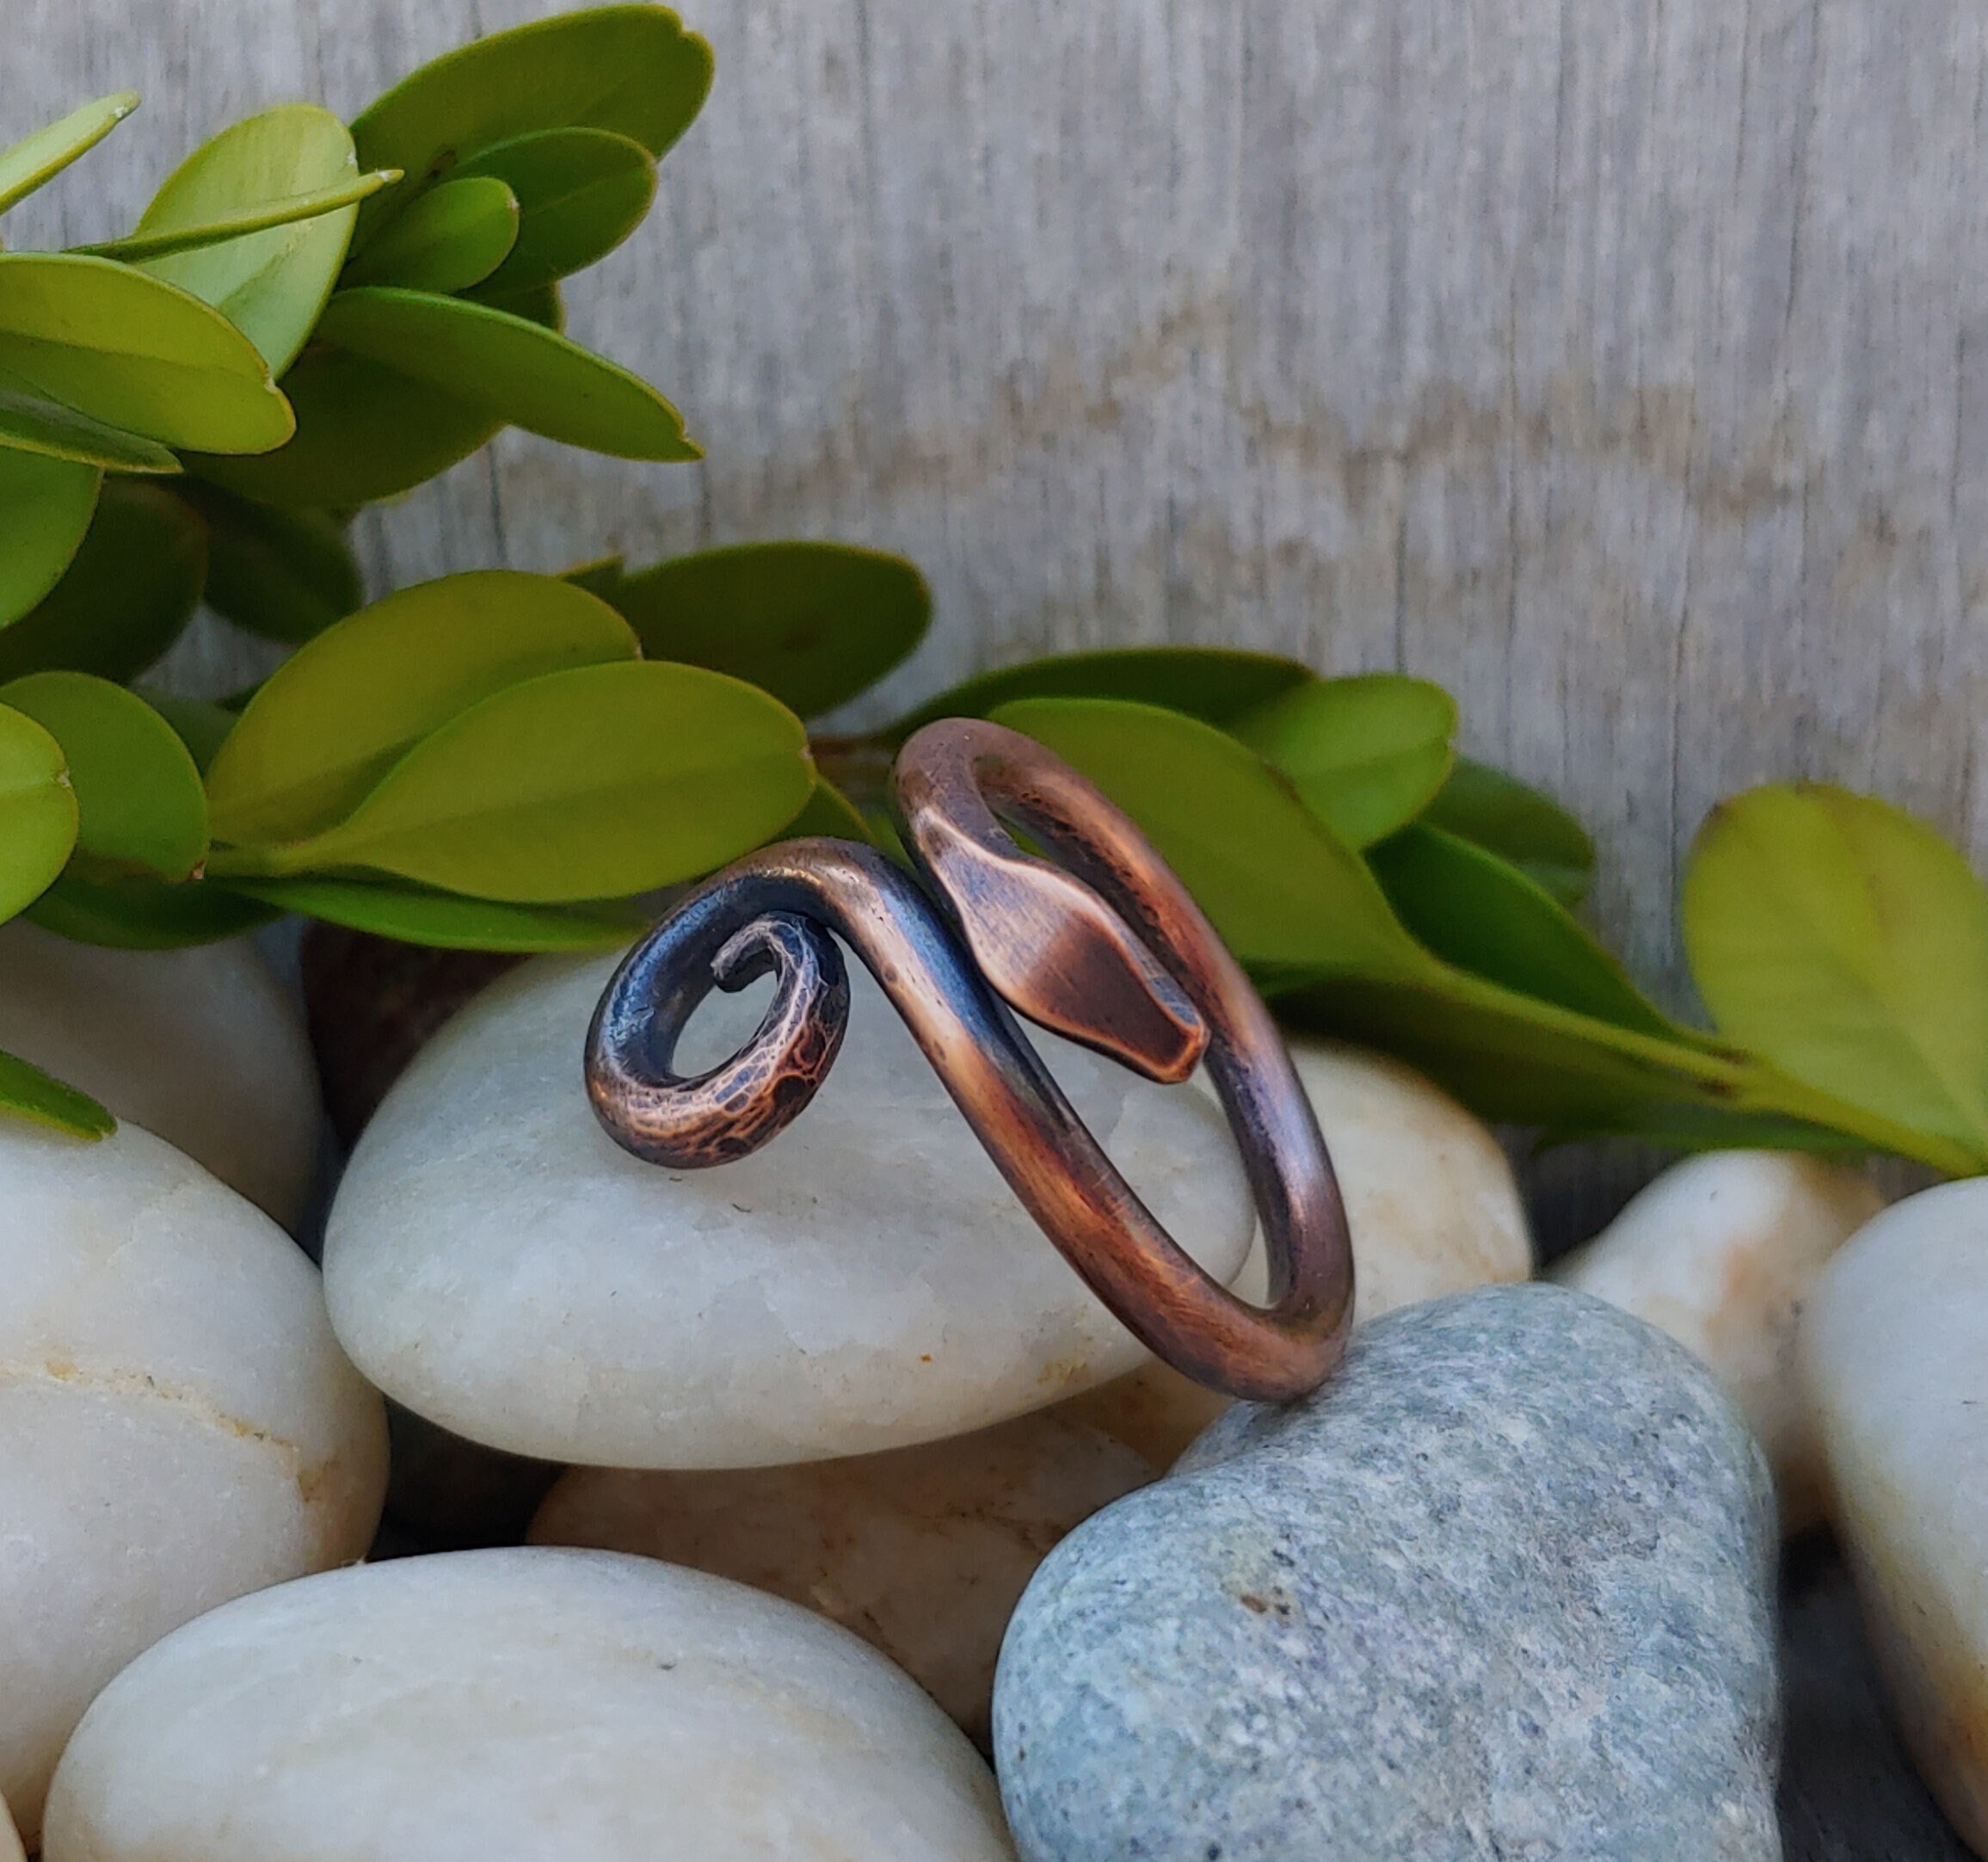 Buy Copper Snake Ring Provides the Fundamental Support, Copper Snake Ring,sarpa  Sutra, Copper Consecrated Snake Ring, Copper Snake Ring Benefits Online in  India - Etsy